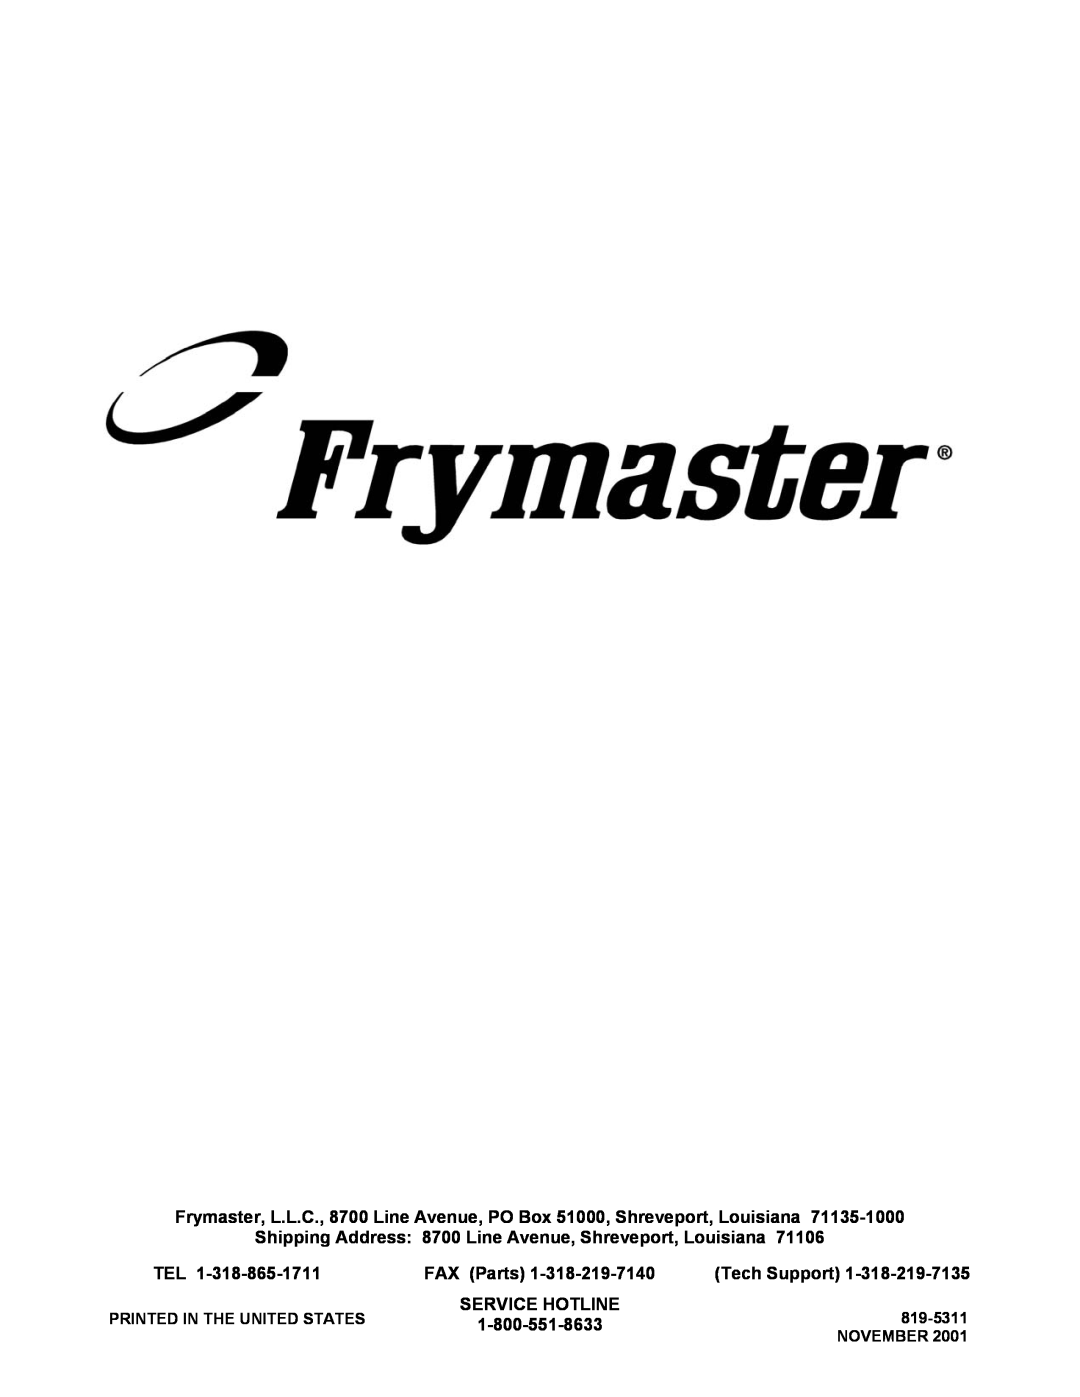 Frymaster GBC, GSMS, GC operation manual FAX Parts, Tech Support, Service Hotline, 819-5311, November 